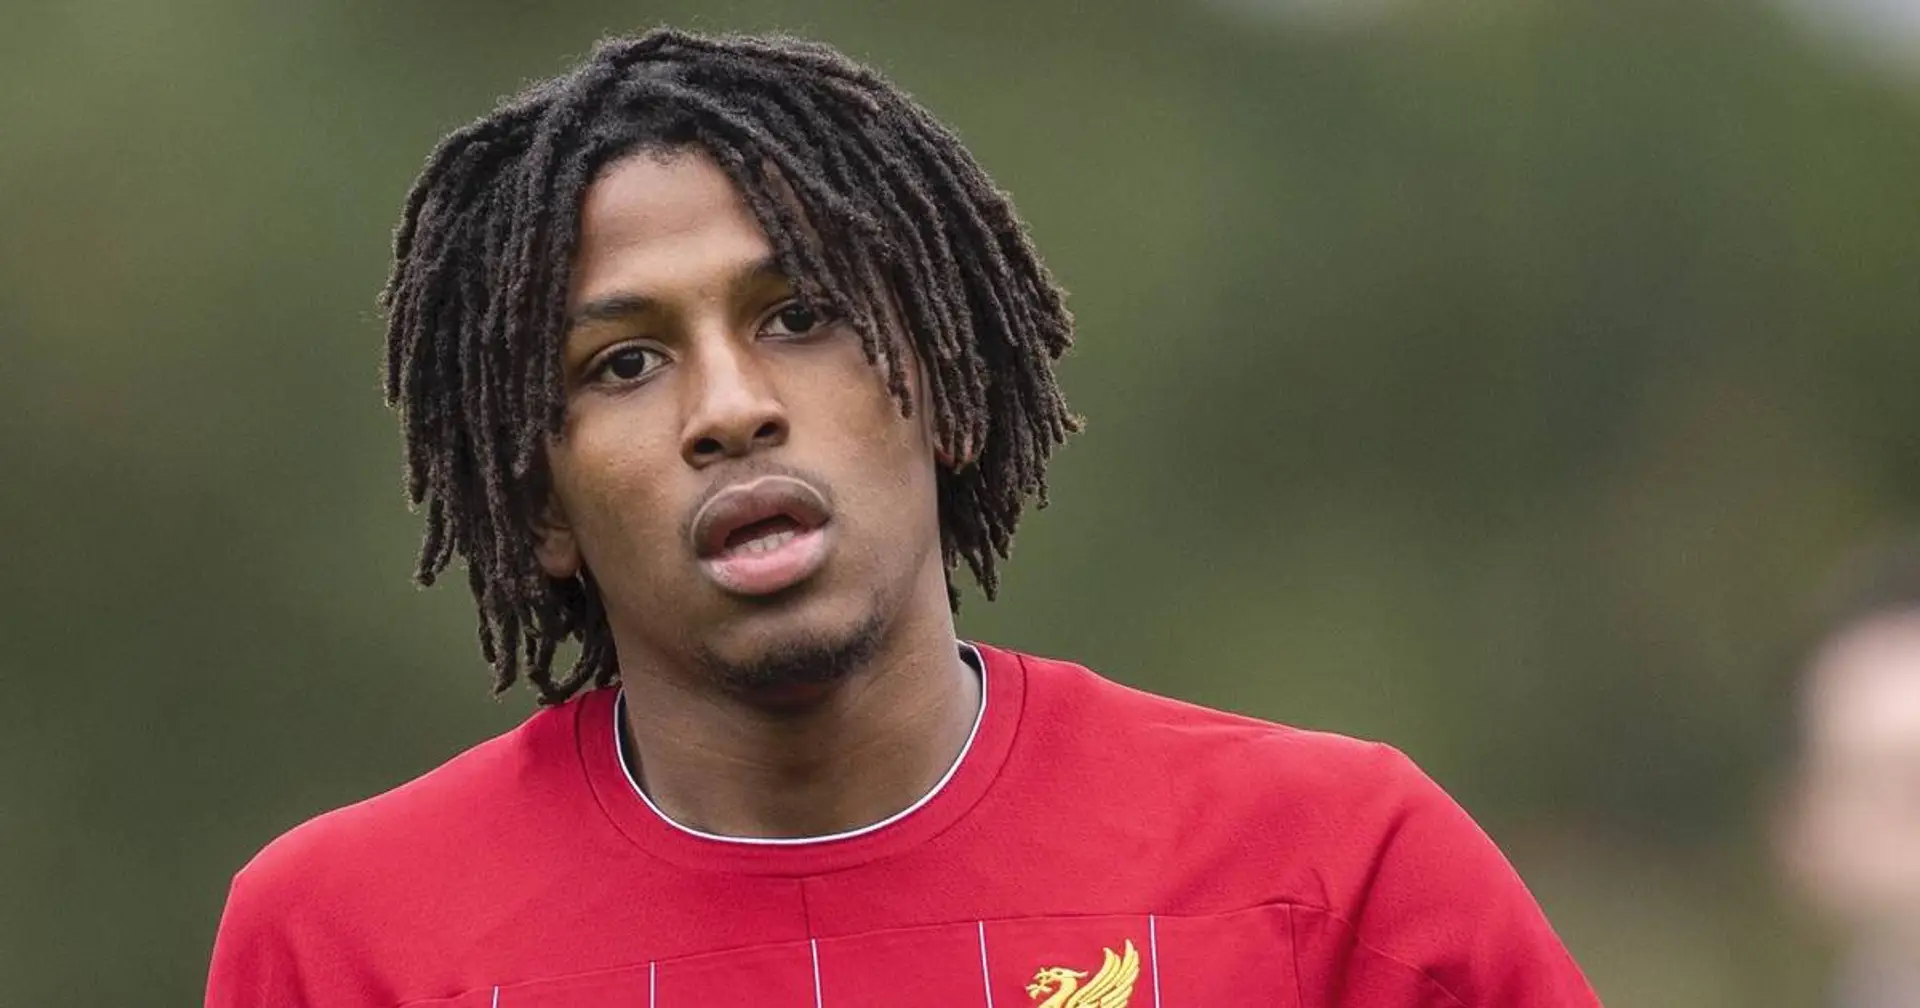 Yasser Larouci set to leave Liverpool as he rejects contract extension